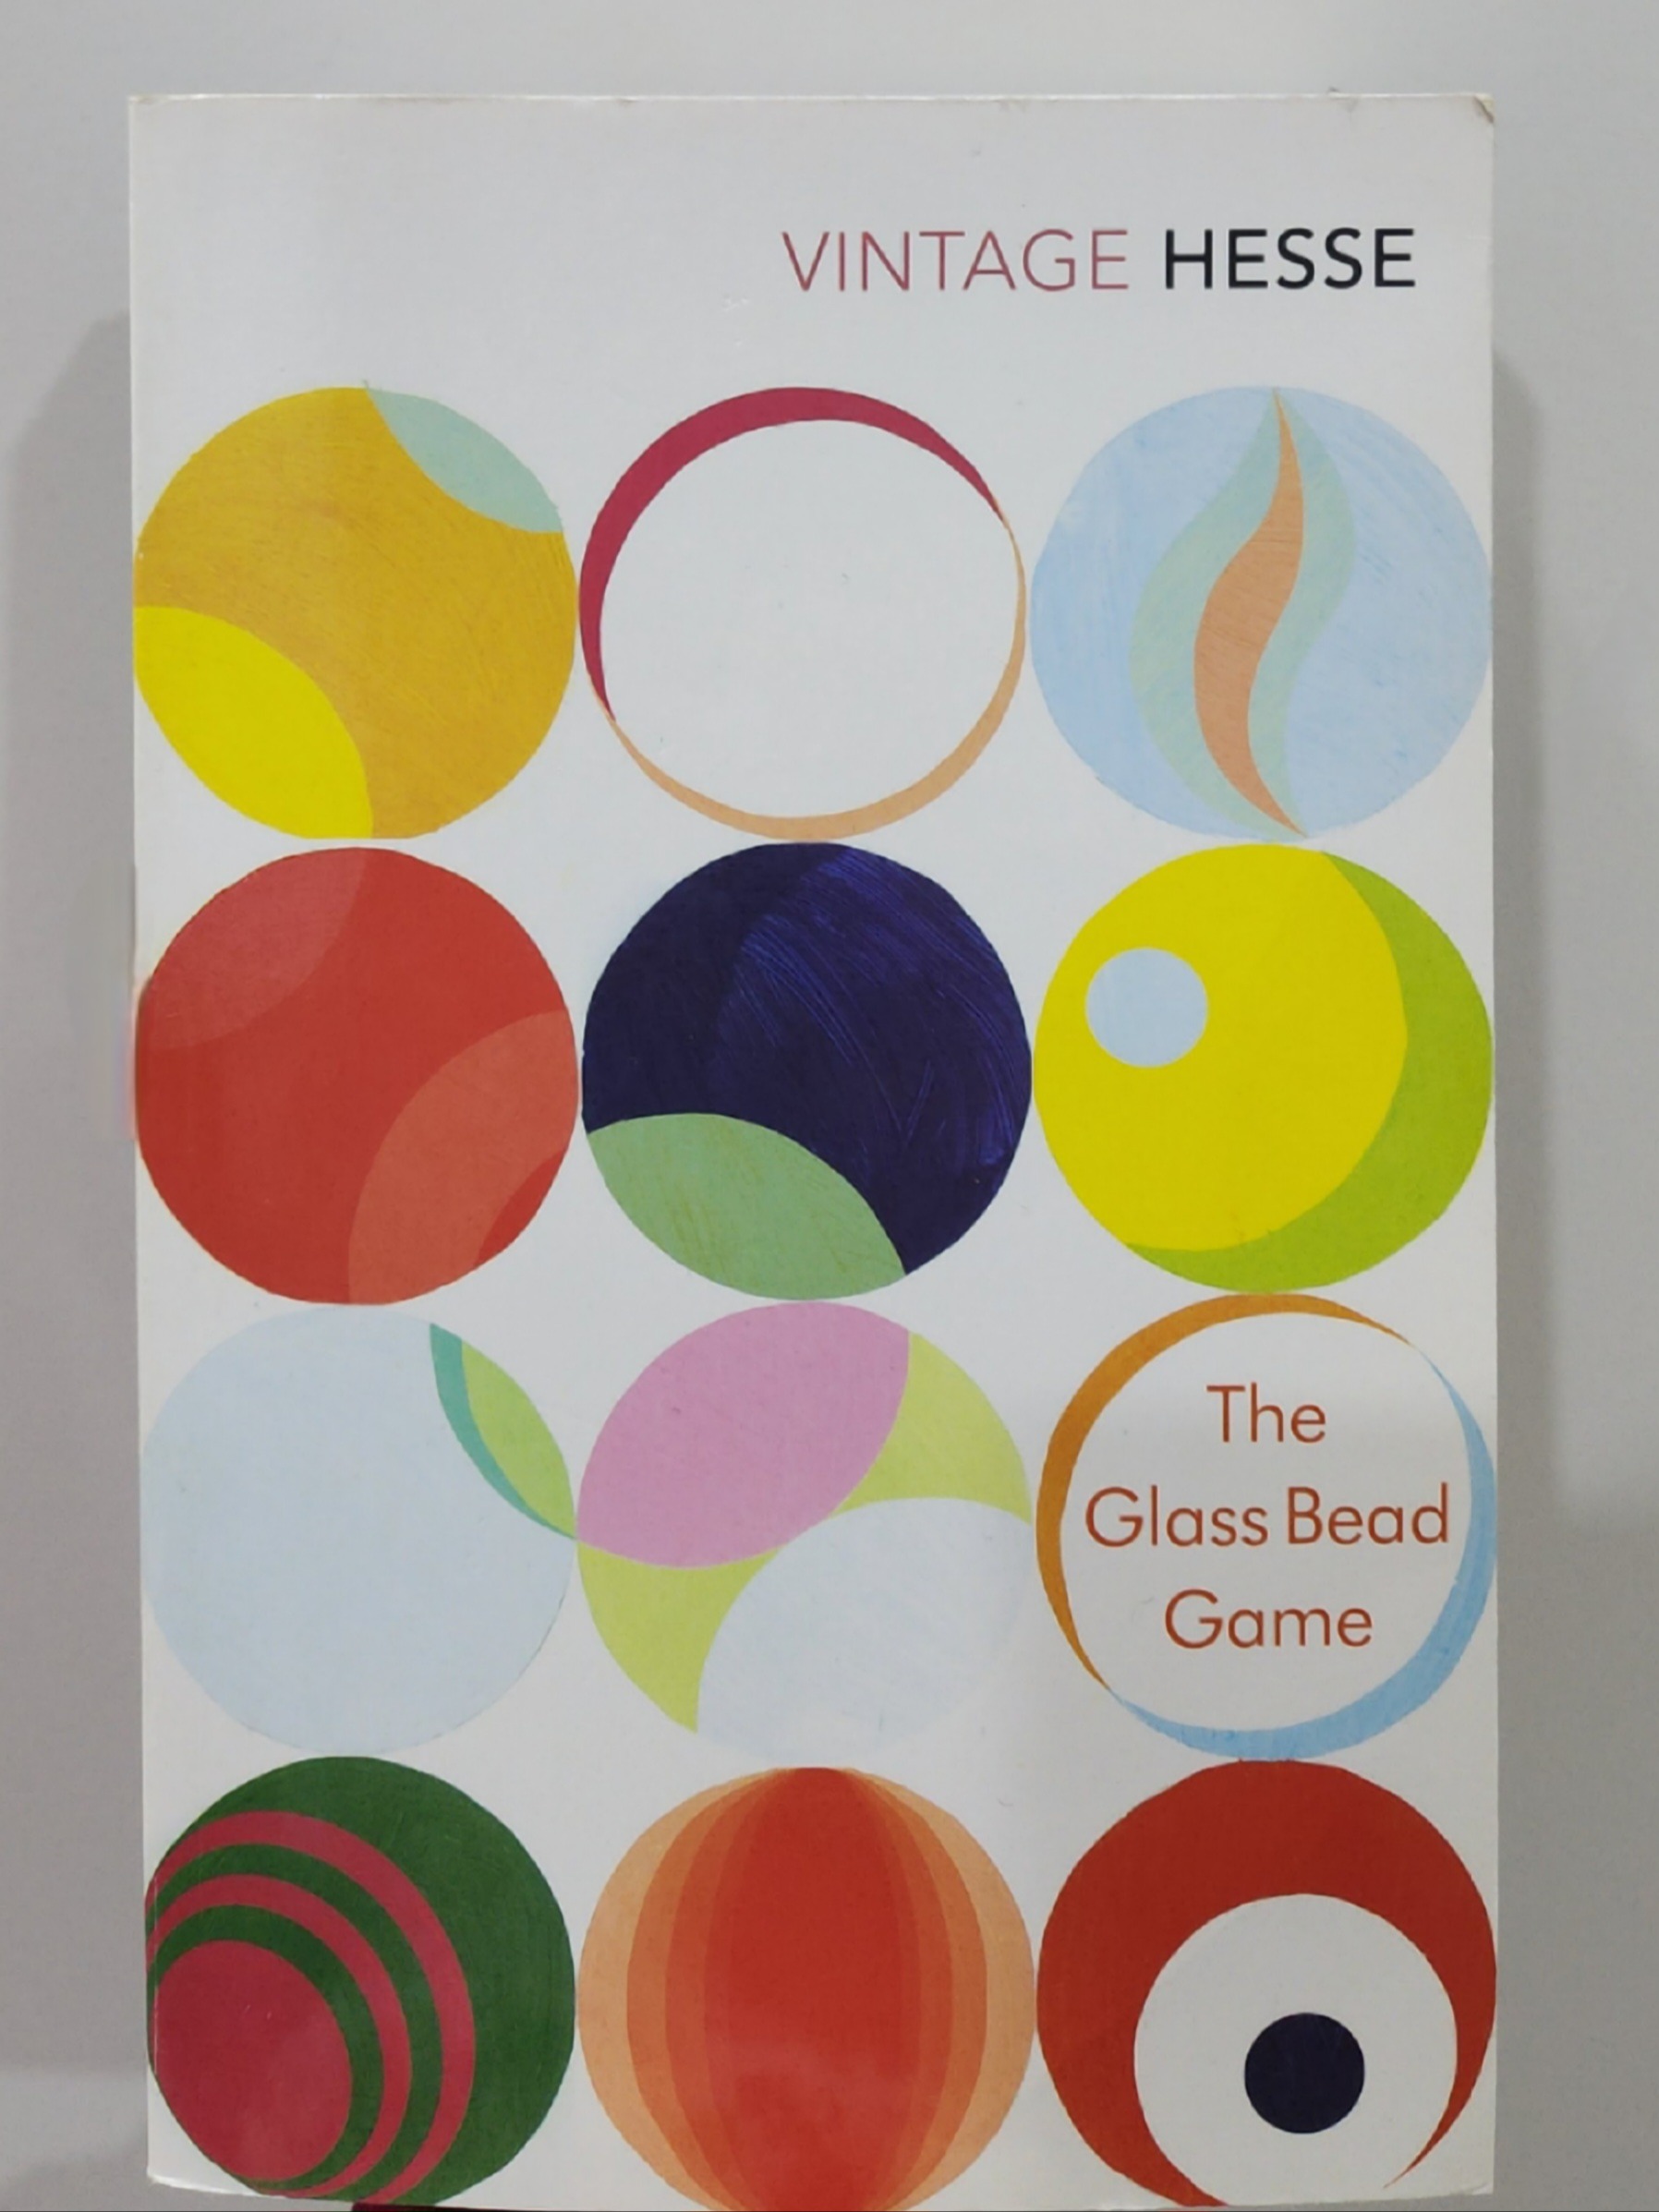 The Galss Bead Game by Hermann Hesse